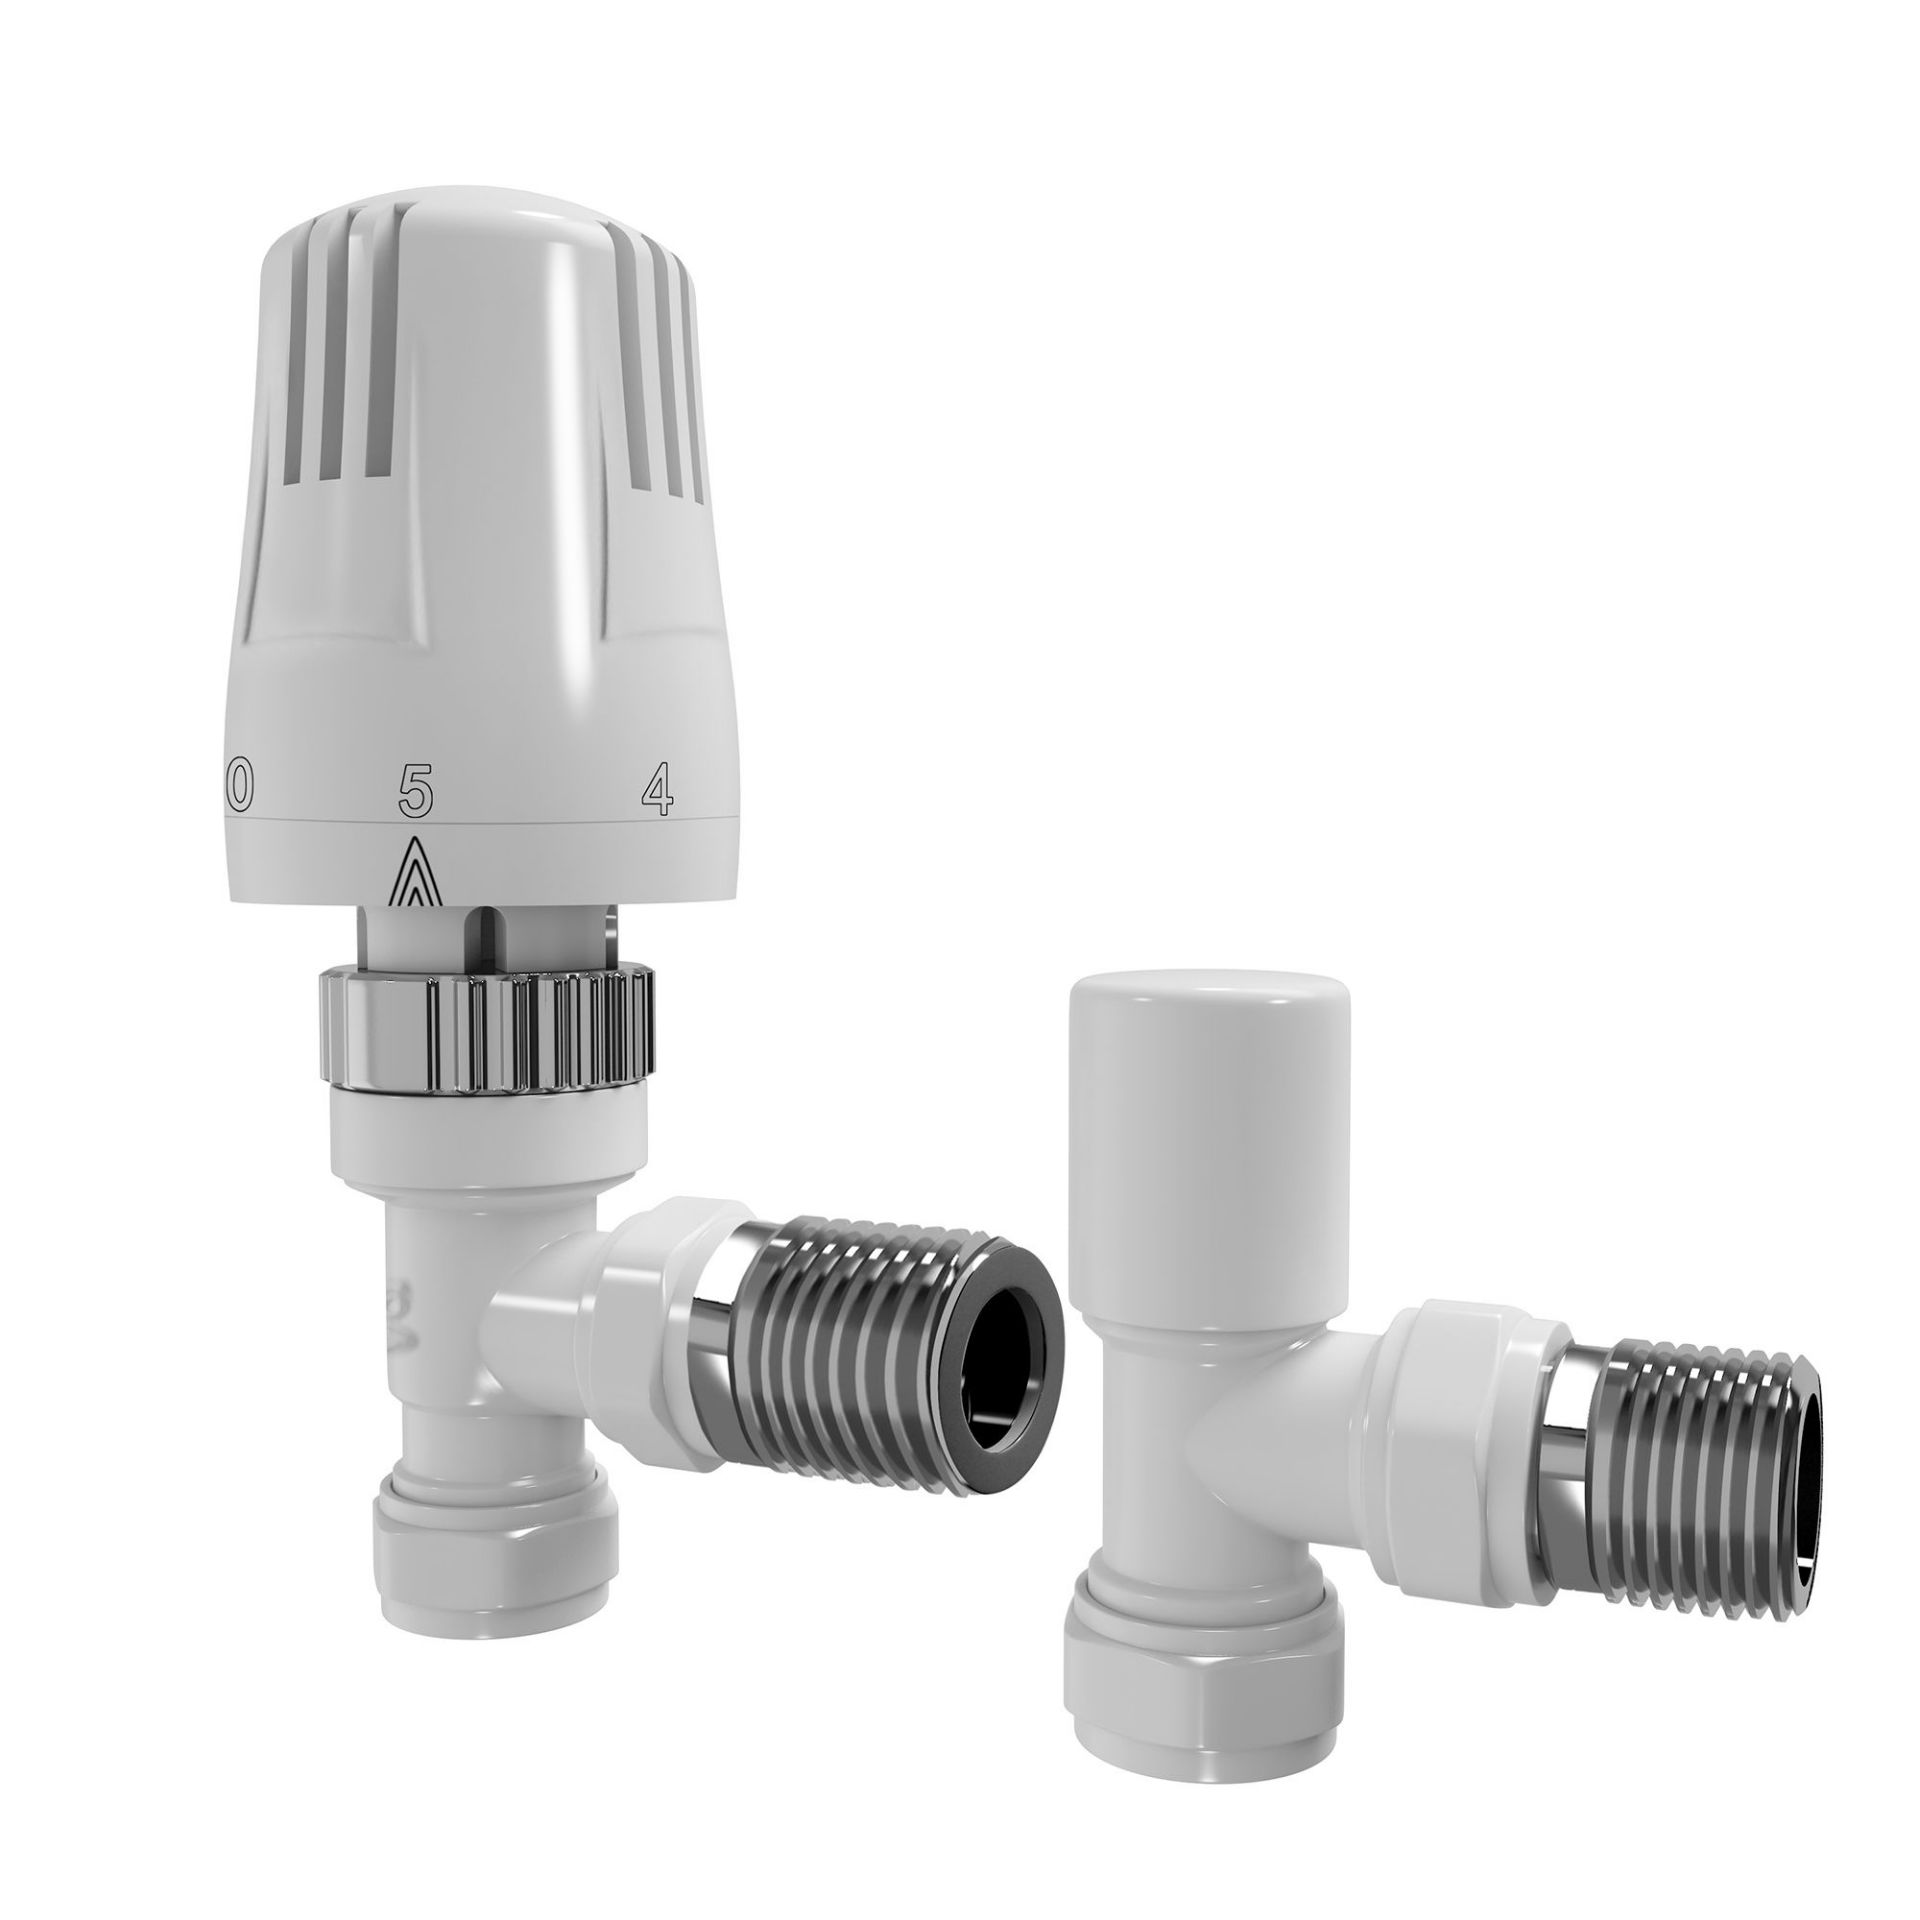 (ED72) 15mm Standard Connection Thermostatic Angled Gloss White Radiator Valves Solid brass